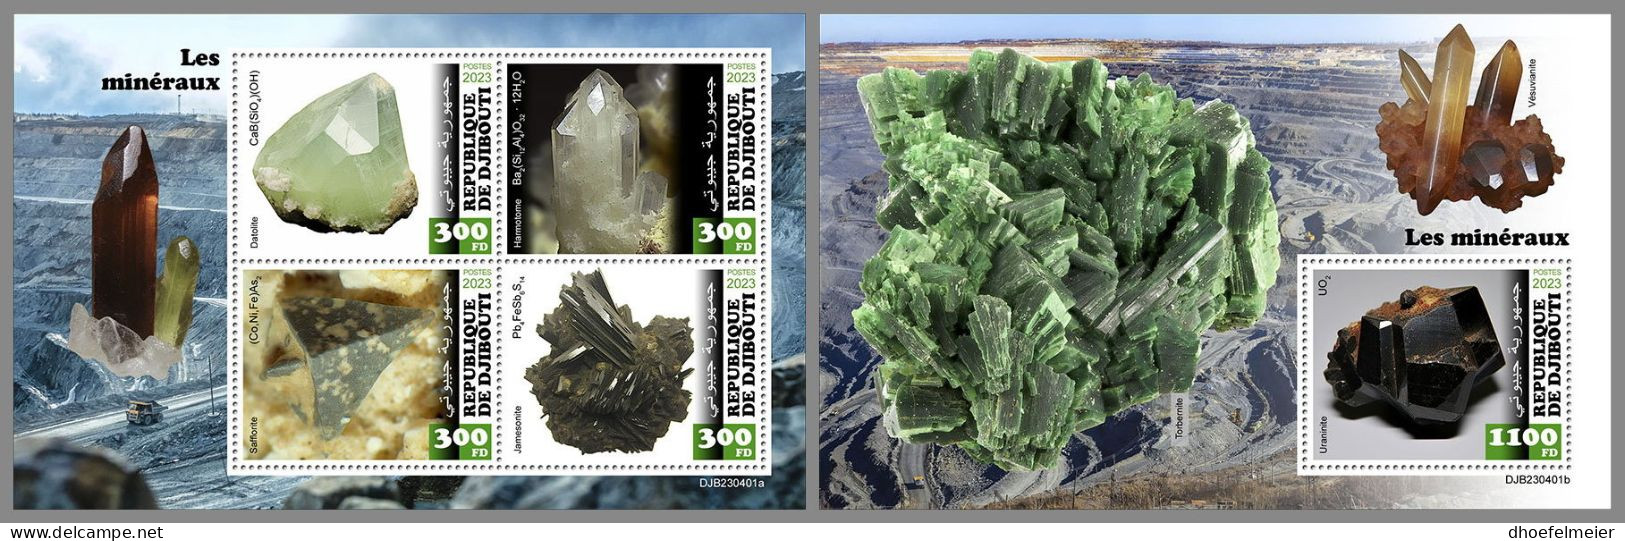 DJIBOUTI 2023 MNH Minerals Mineralien M/S+S/S – OFFICIAL ISSUE – DHQ2420 - Minerals